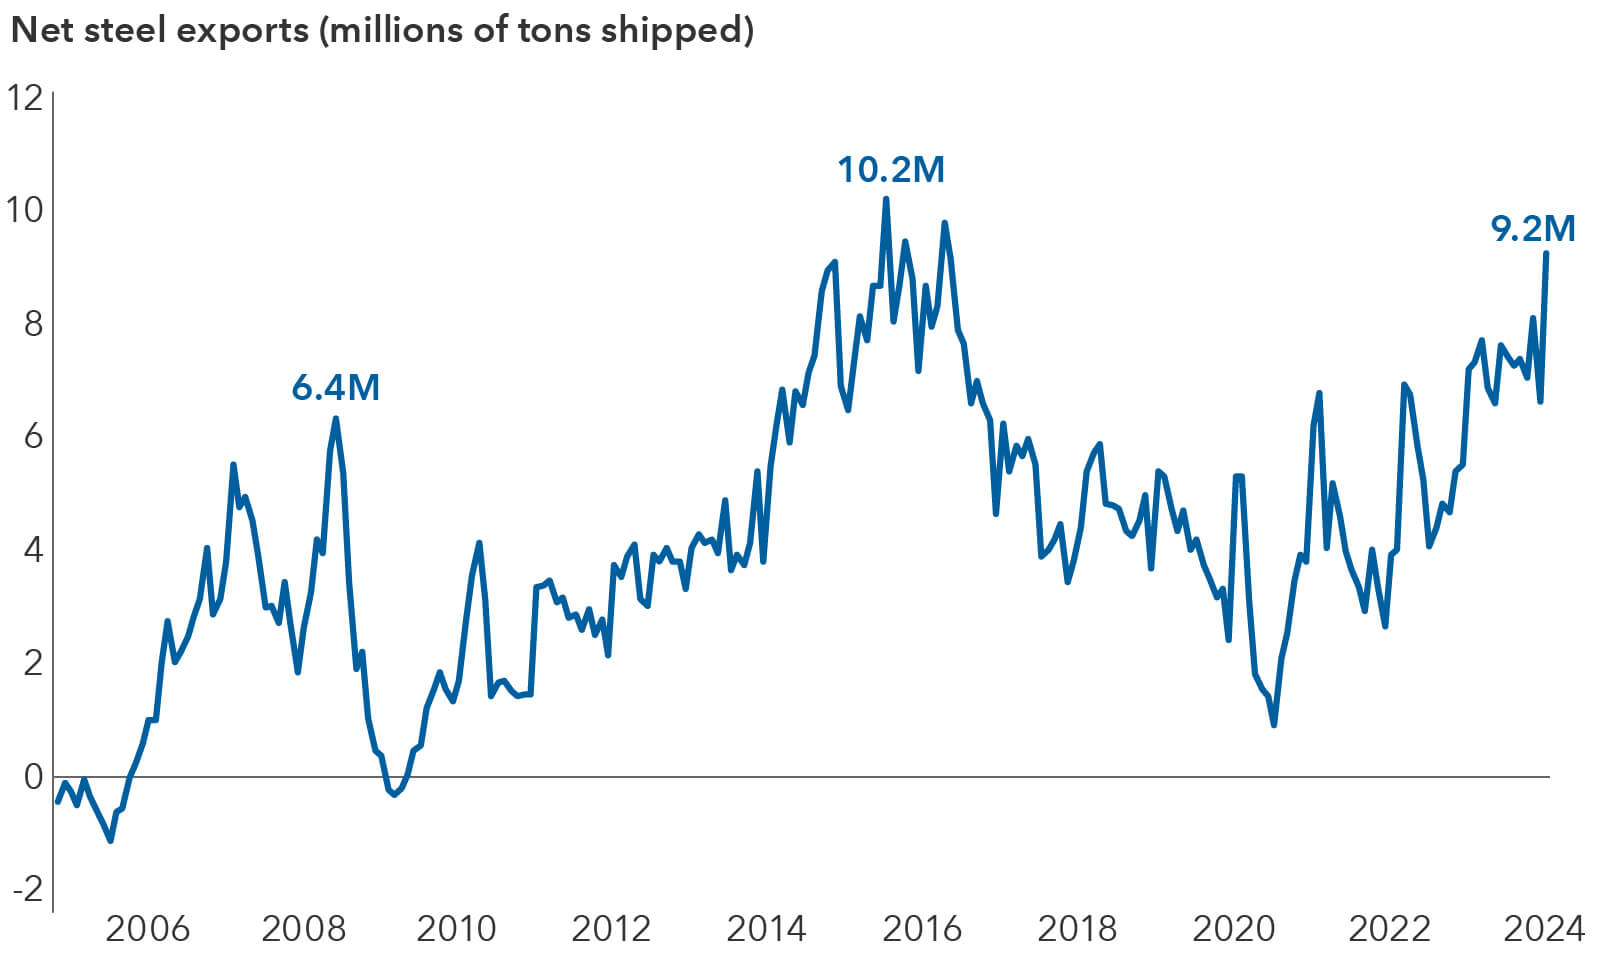 The line chart shows trends in China’s net steel exports from 2005 to 2024. The vertical axis ranges from negative 2 million to 12 million tons shipped, while the horizontal axis shows the corresponding years. The line shows China had a steel trade deficit in 2005.  Exports rose in 2006 to a peak of 6.4 million tons in 2008.  Steel exports declined but rose again until around 2015, peaking at 10.2 million tons. Exports declined again to nearly 1 million tons exported in 2020 and have rebounded to 9.2 million tons as of March 1, 2024. 